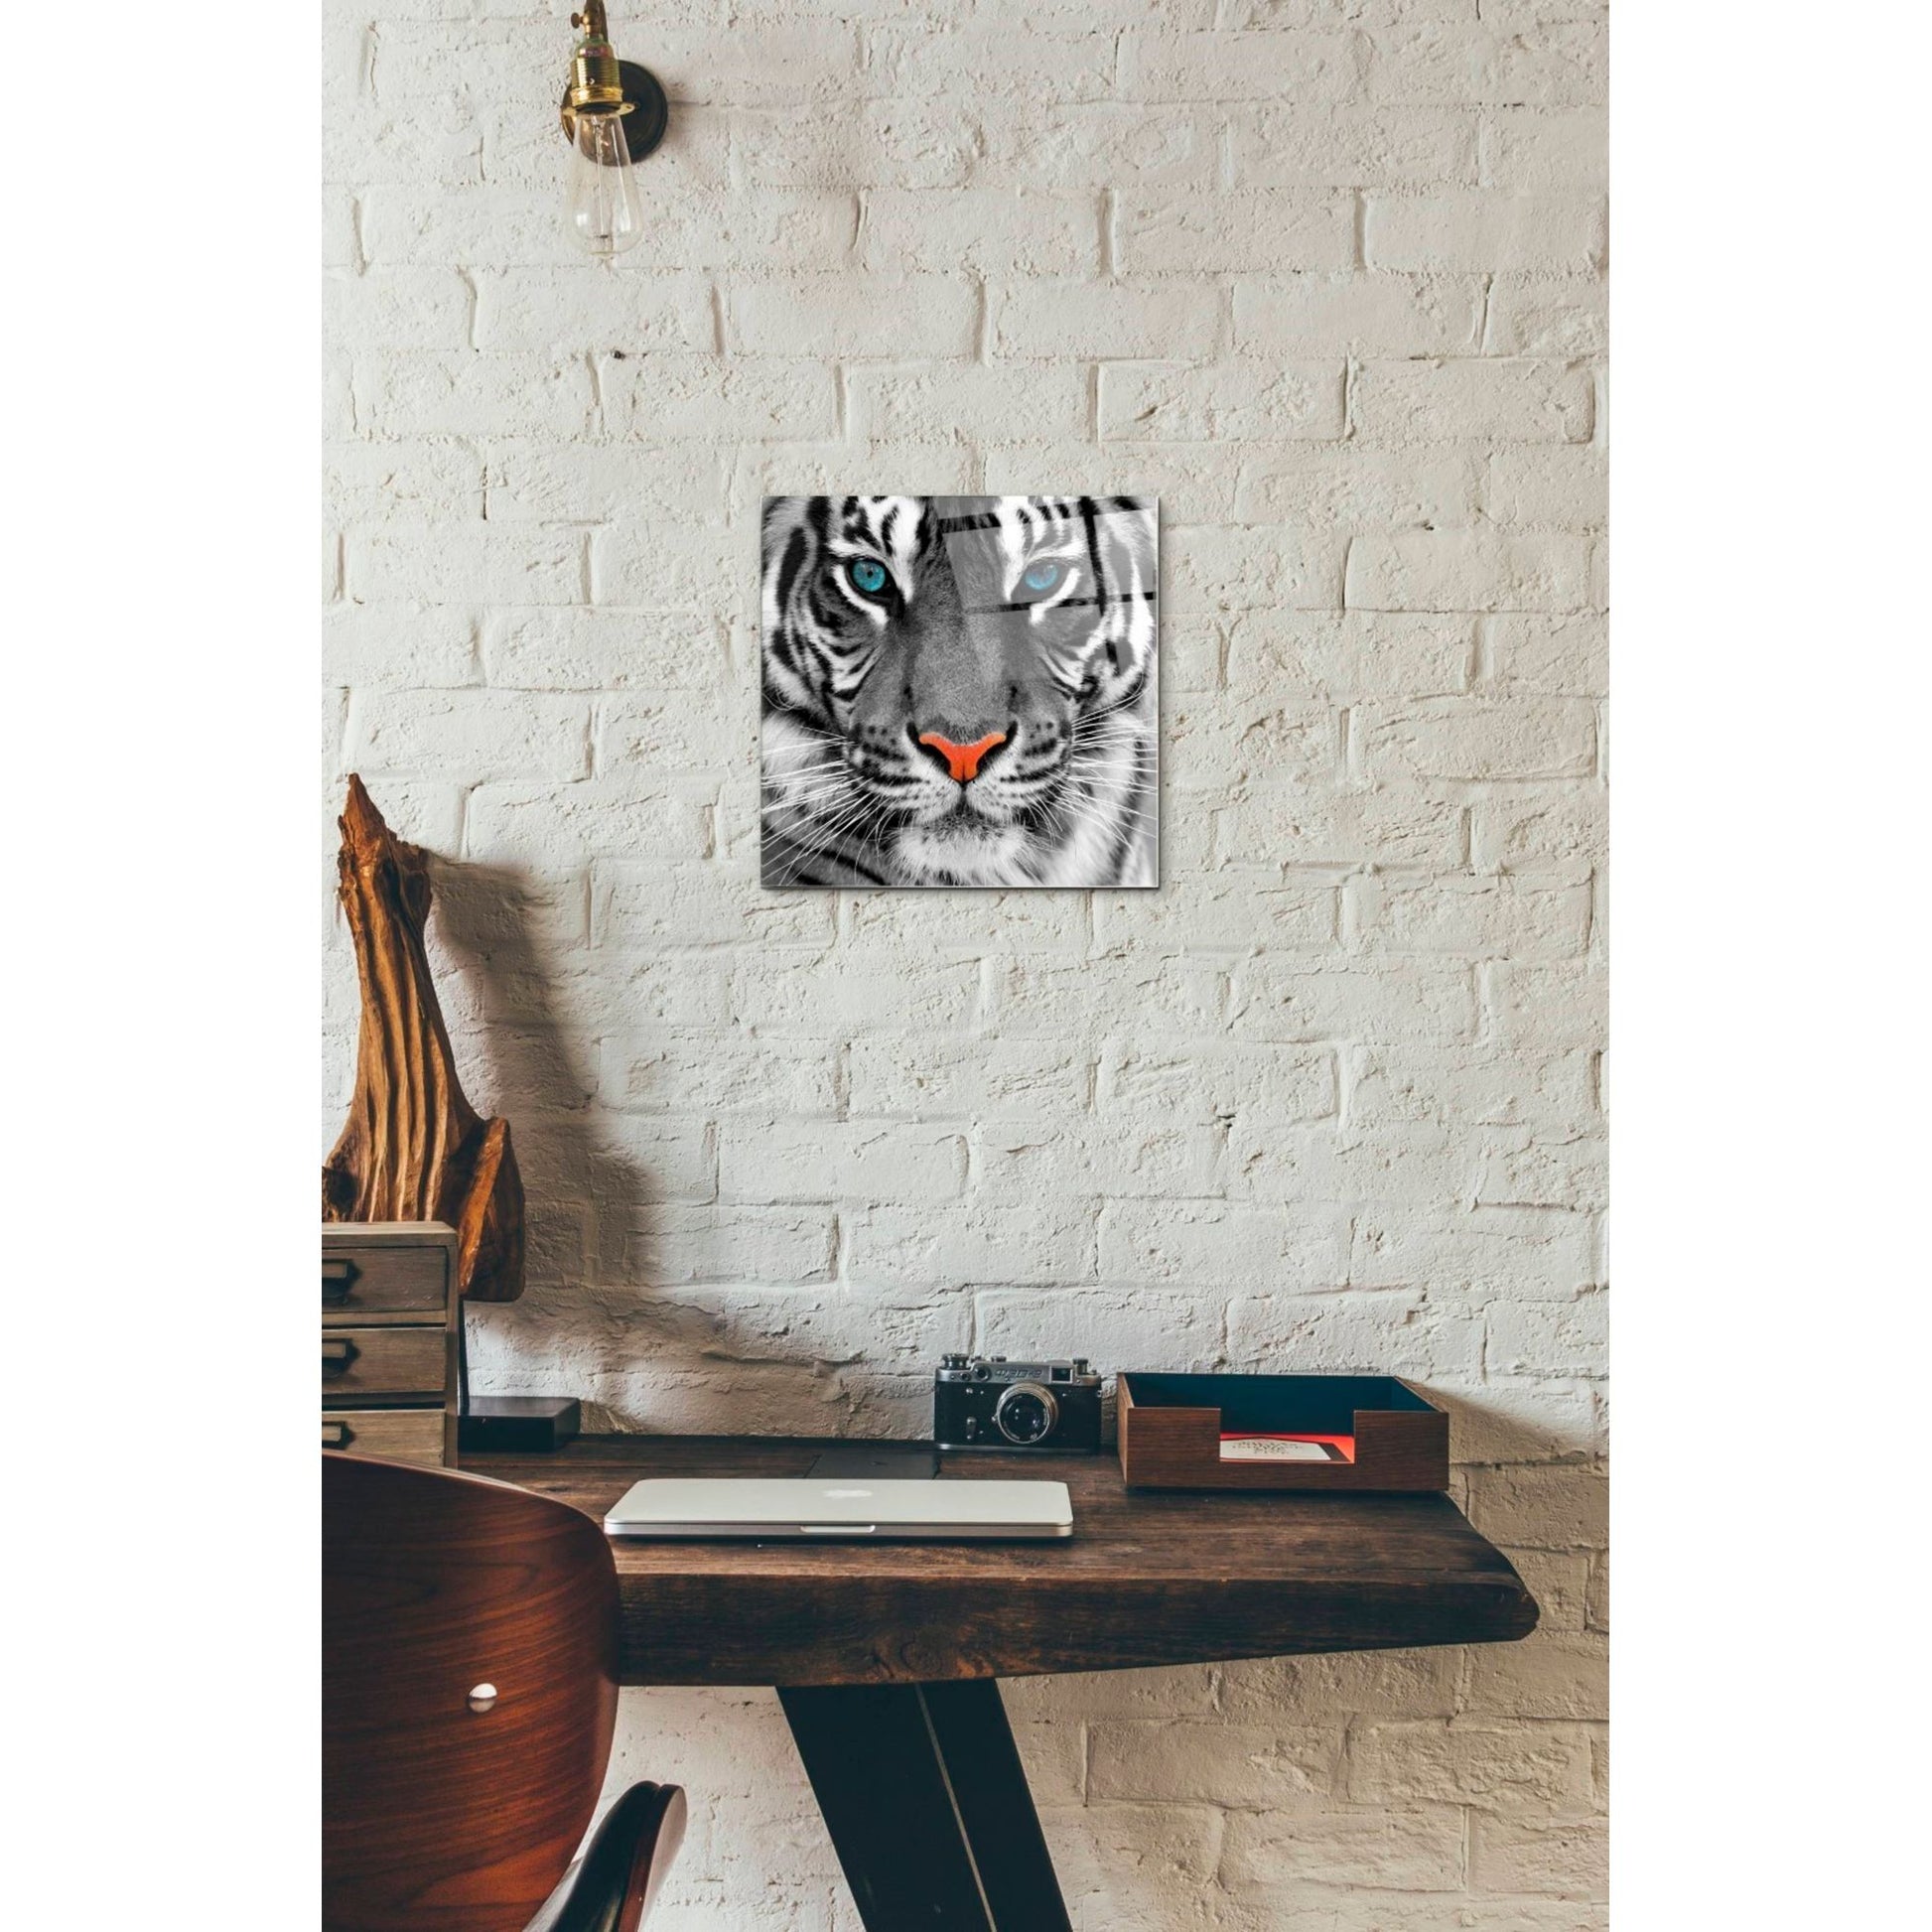 Epic Art 'Thrill of the Tiger' Acrylic Glass Wall Art,12x12